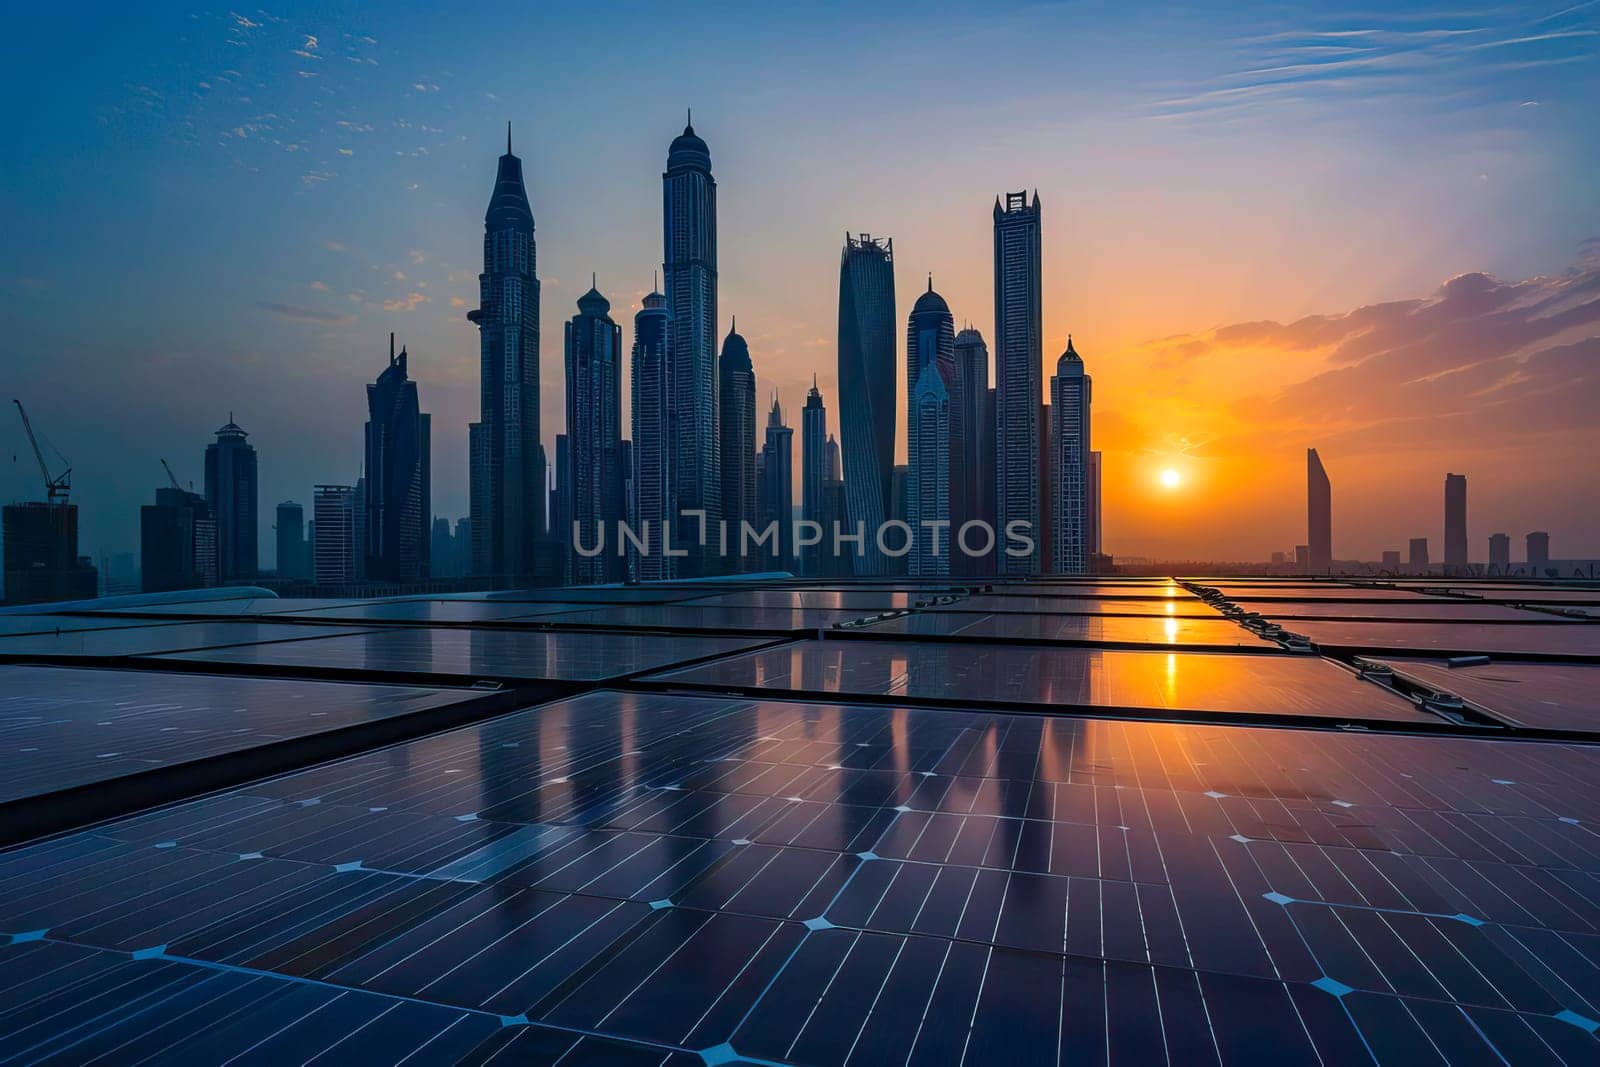 A solar panel with the sun setting in the background, near a modern city with skyscrapers.